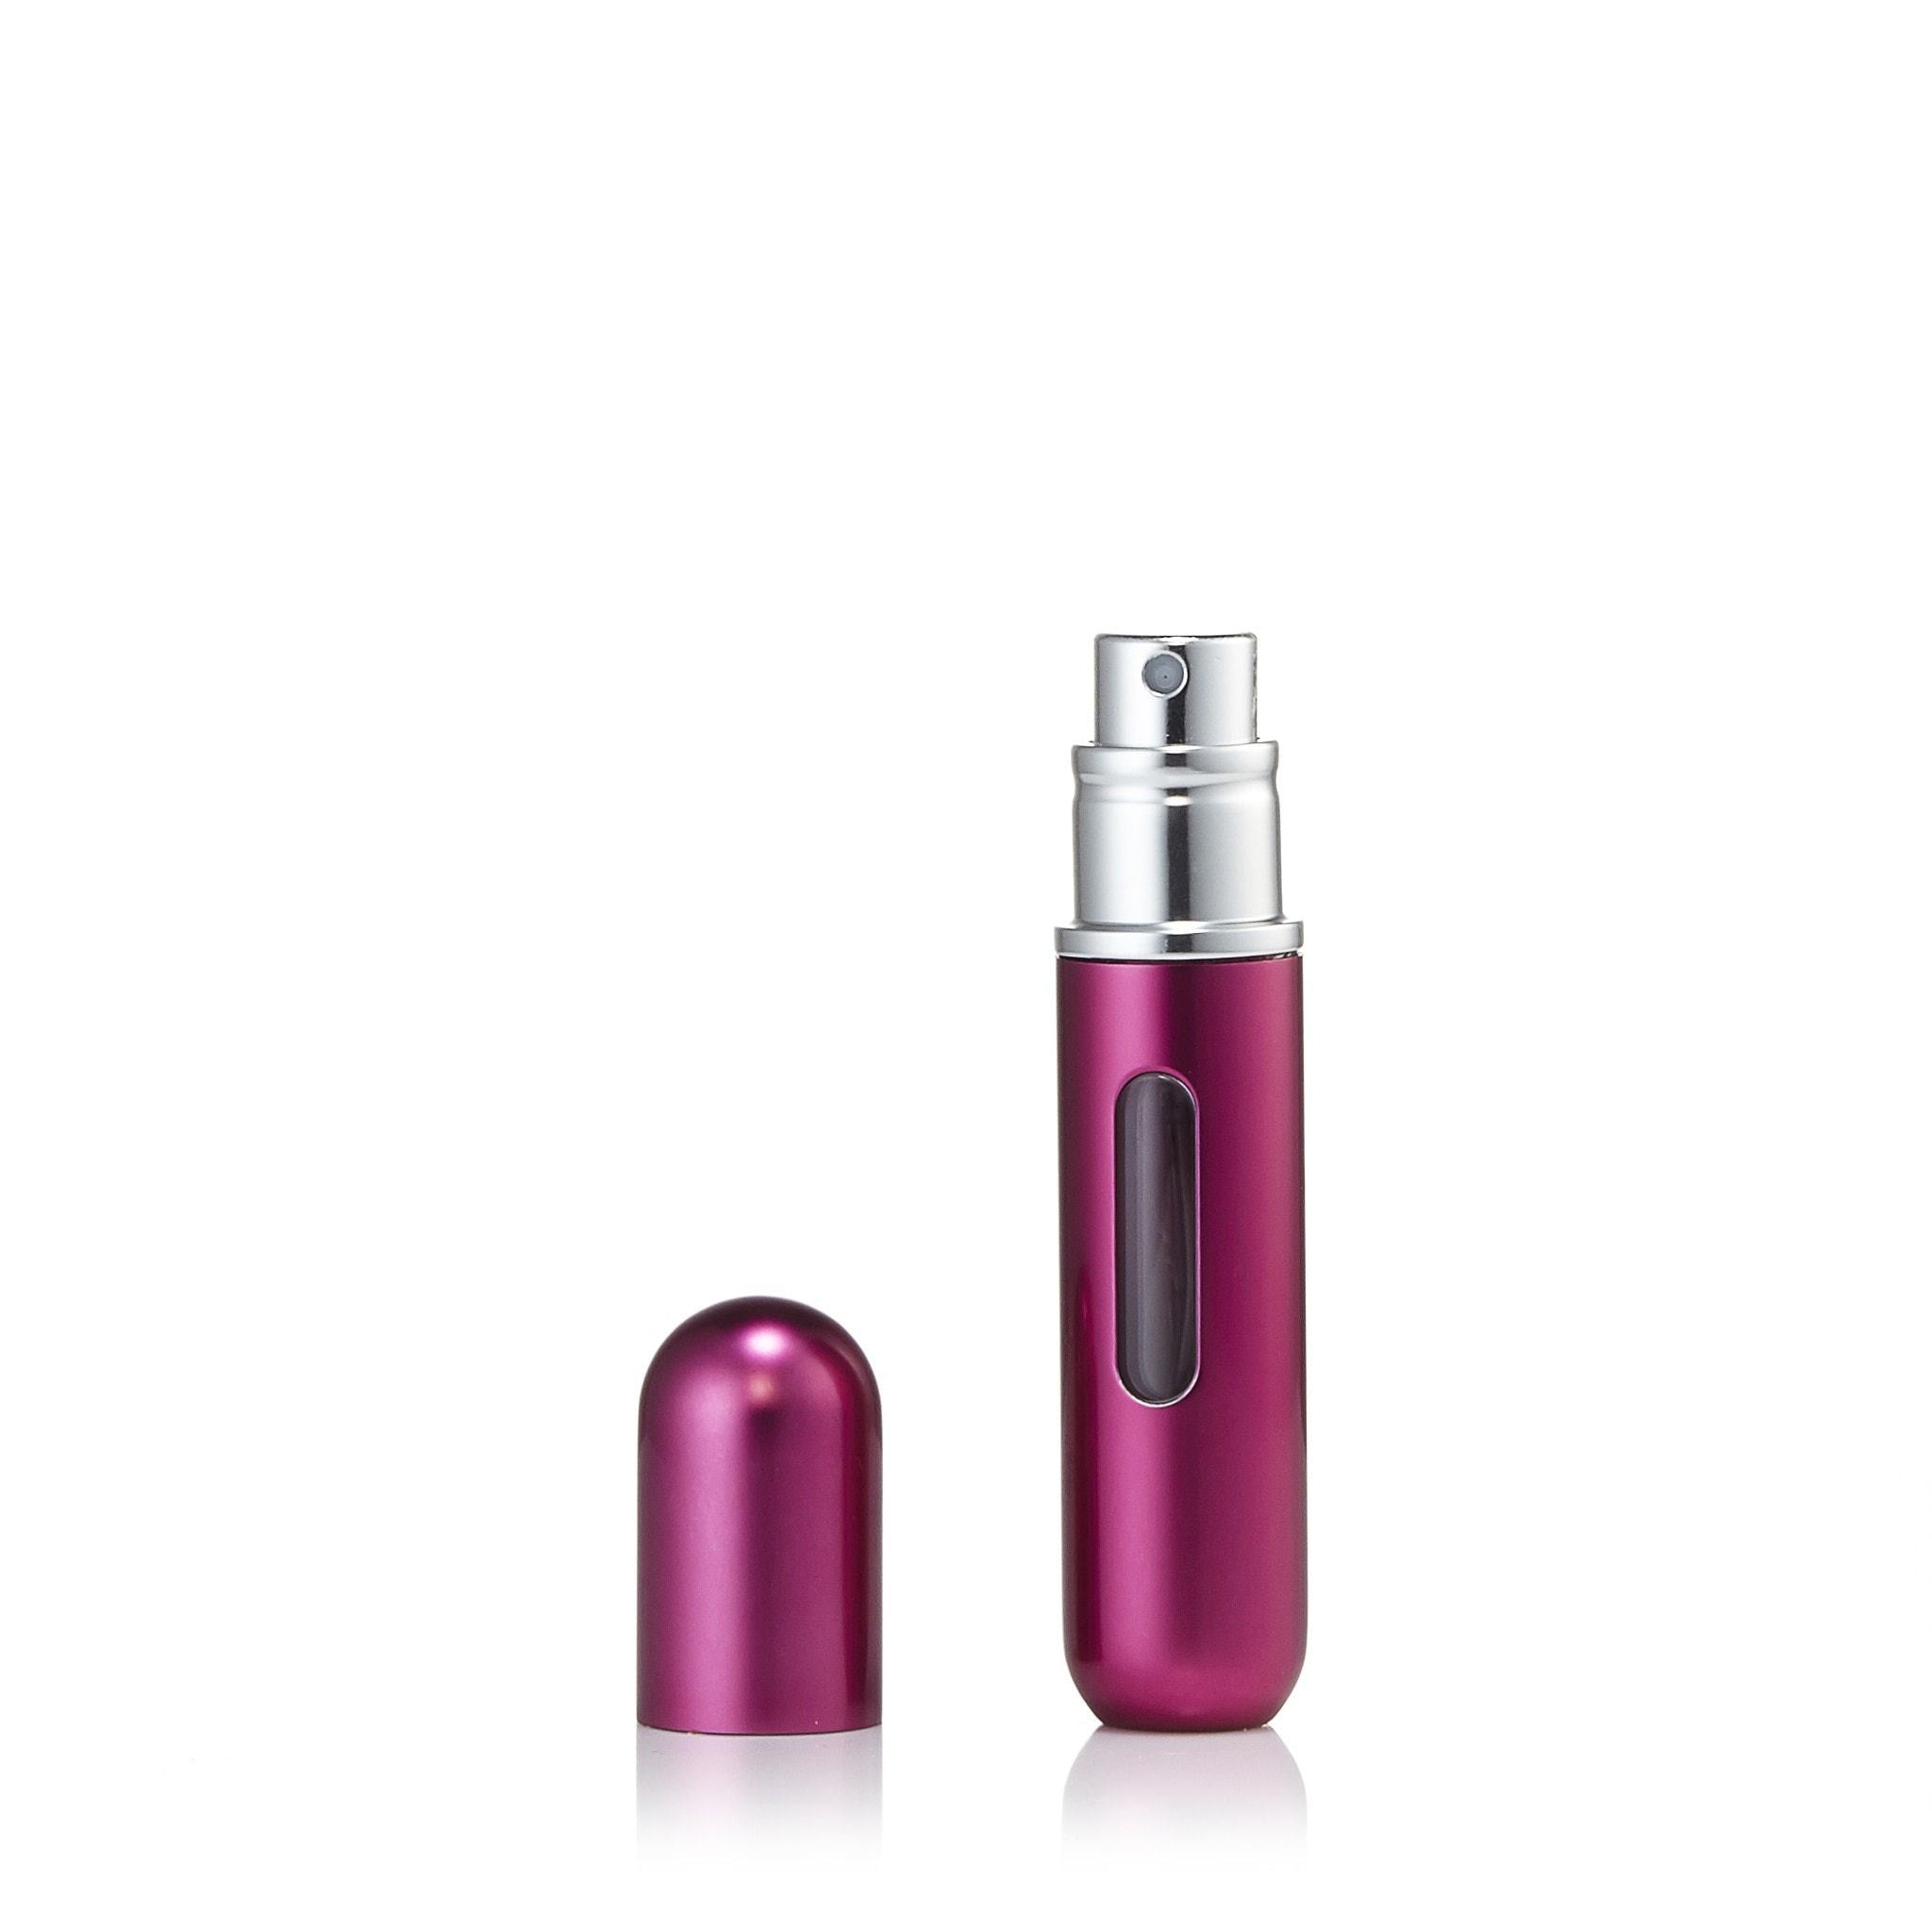 Pump and Fill Fragrance Atomizer – Flo by Perfumania